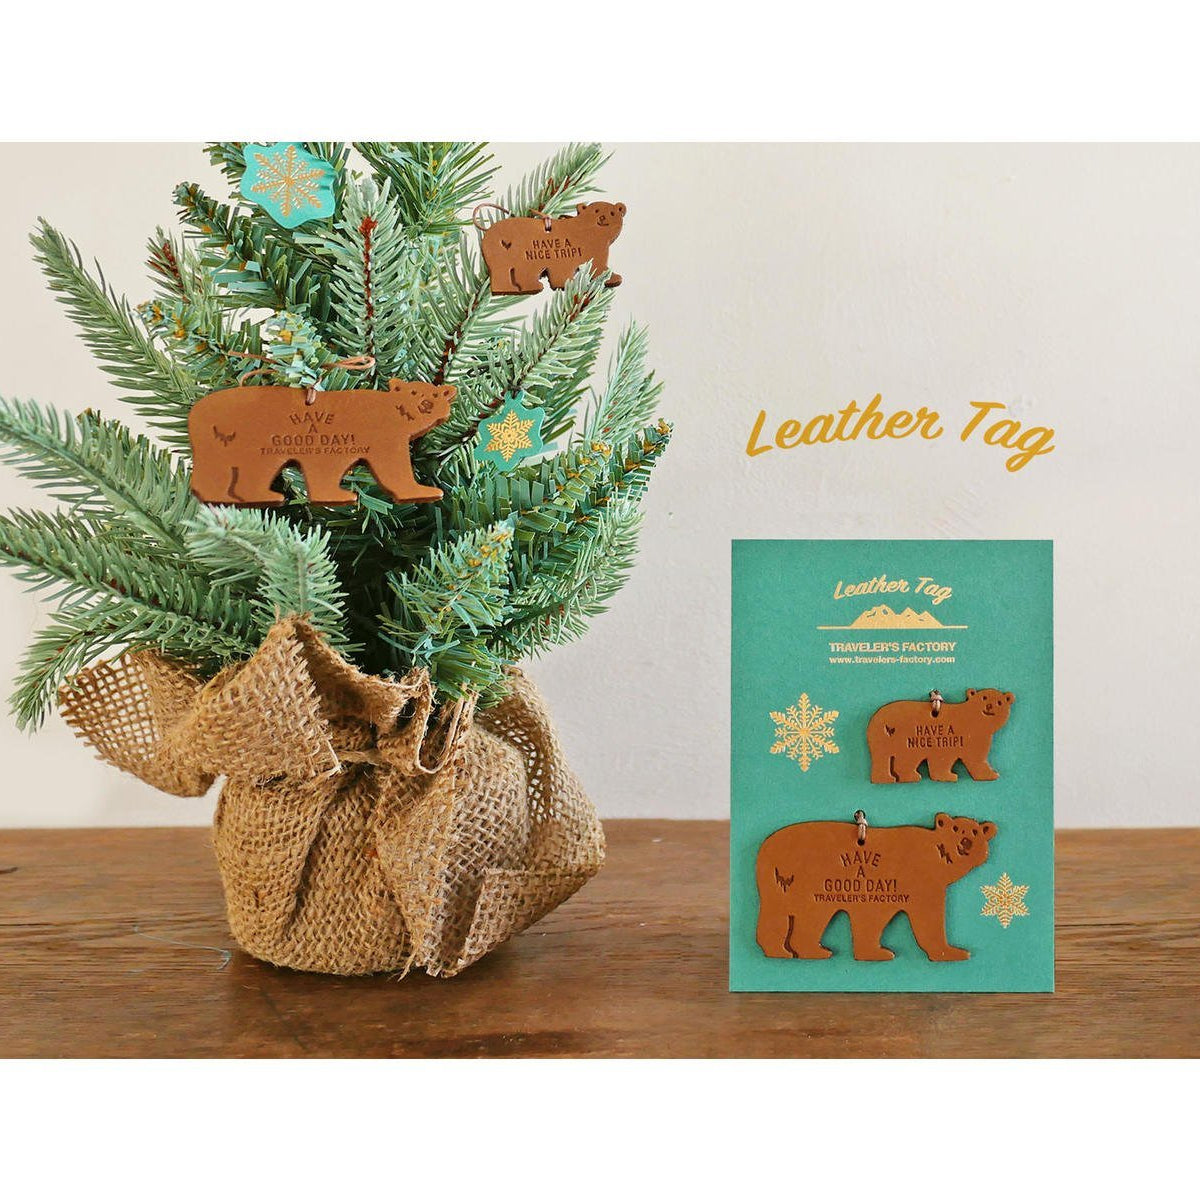 TRAVELERS FACTORY Leather Tag Bear